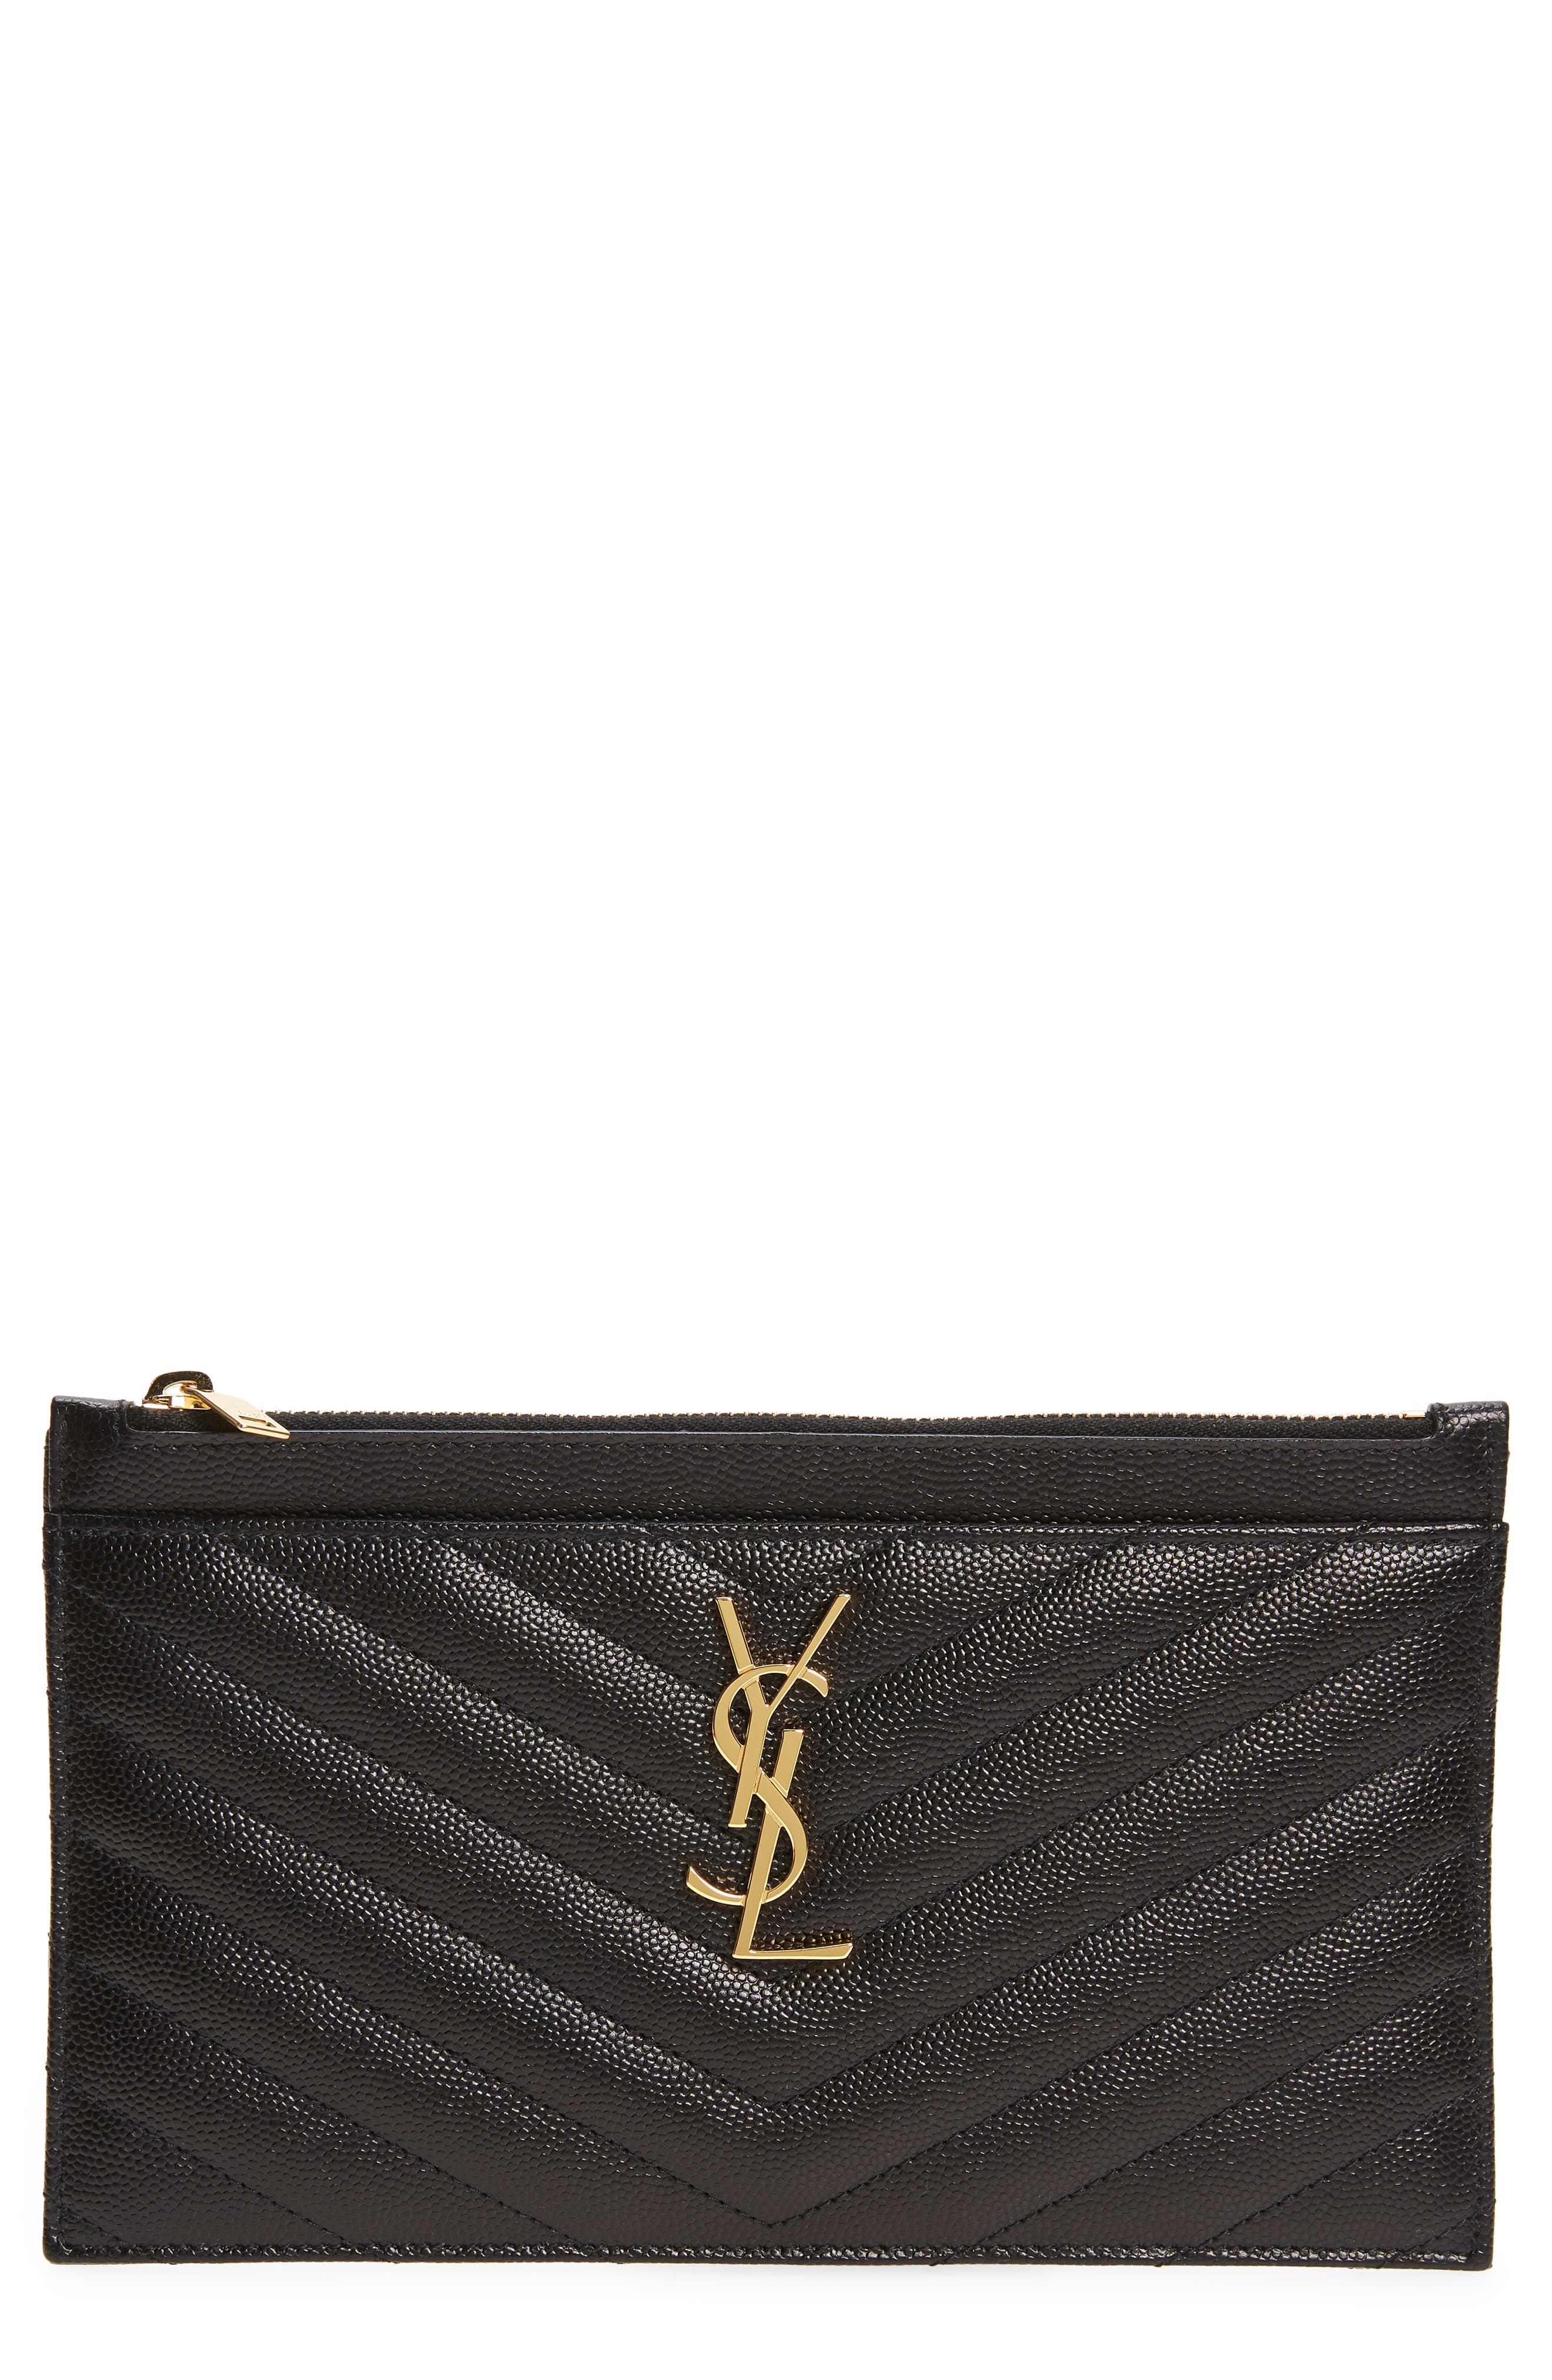 Saint Laurent Monogramme Quilted Leather Zip Pouch in Nero at Nordstrom